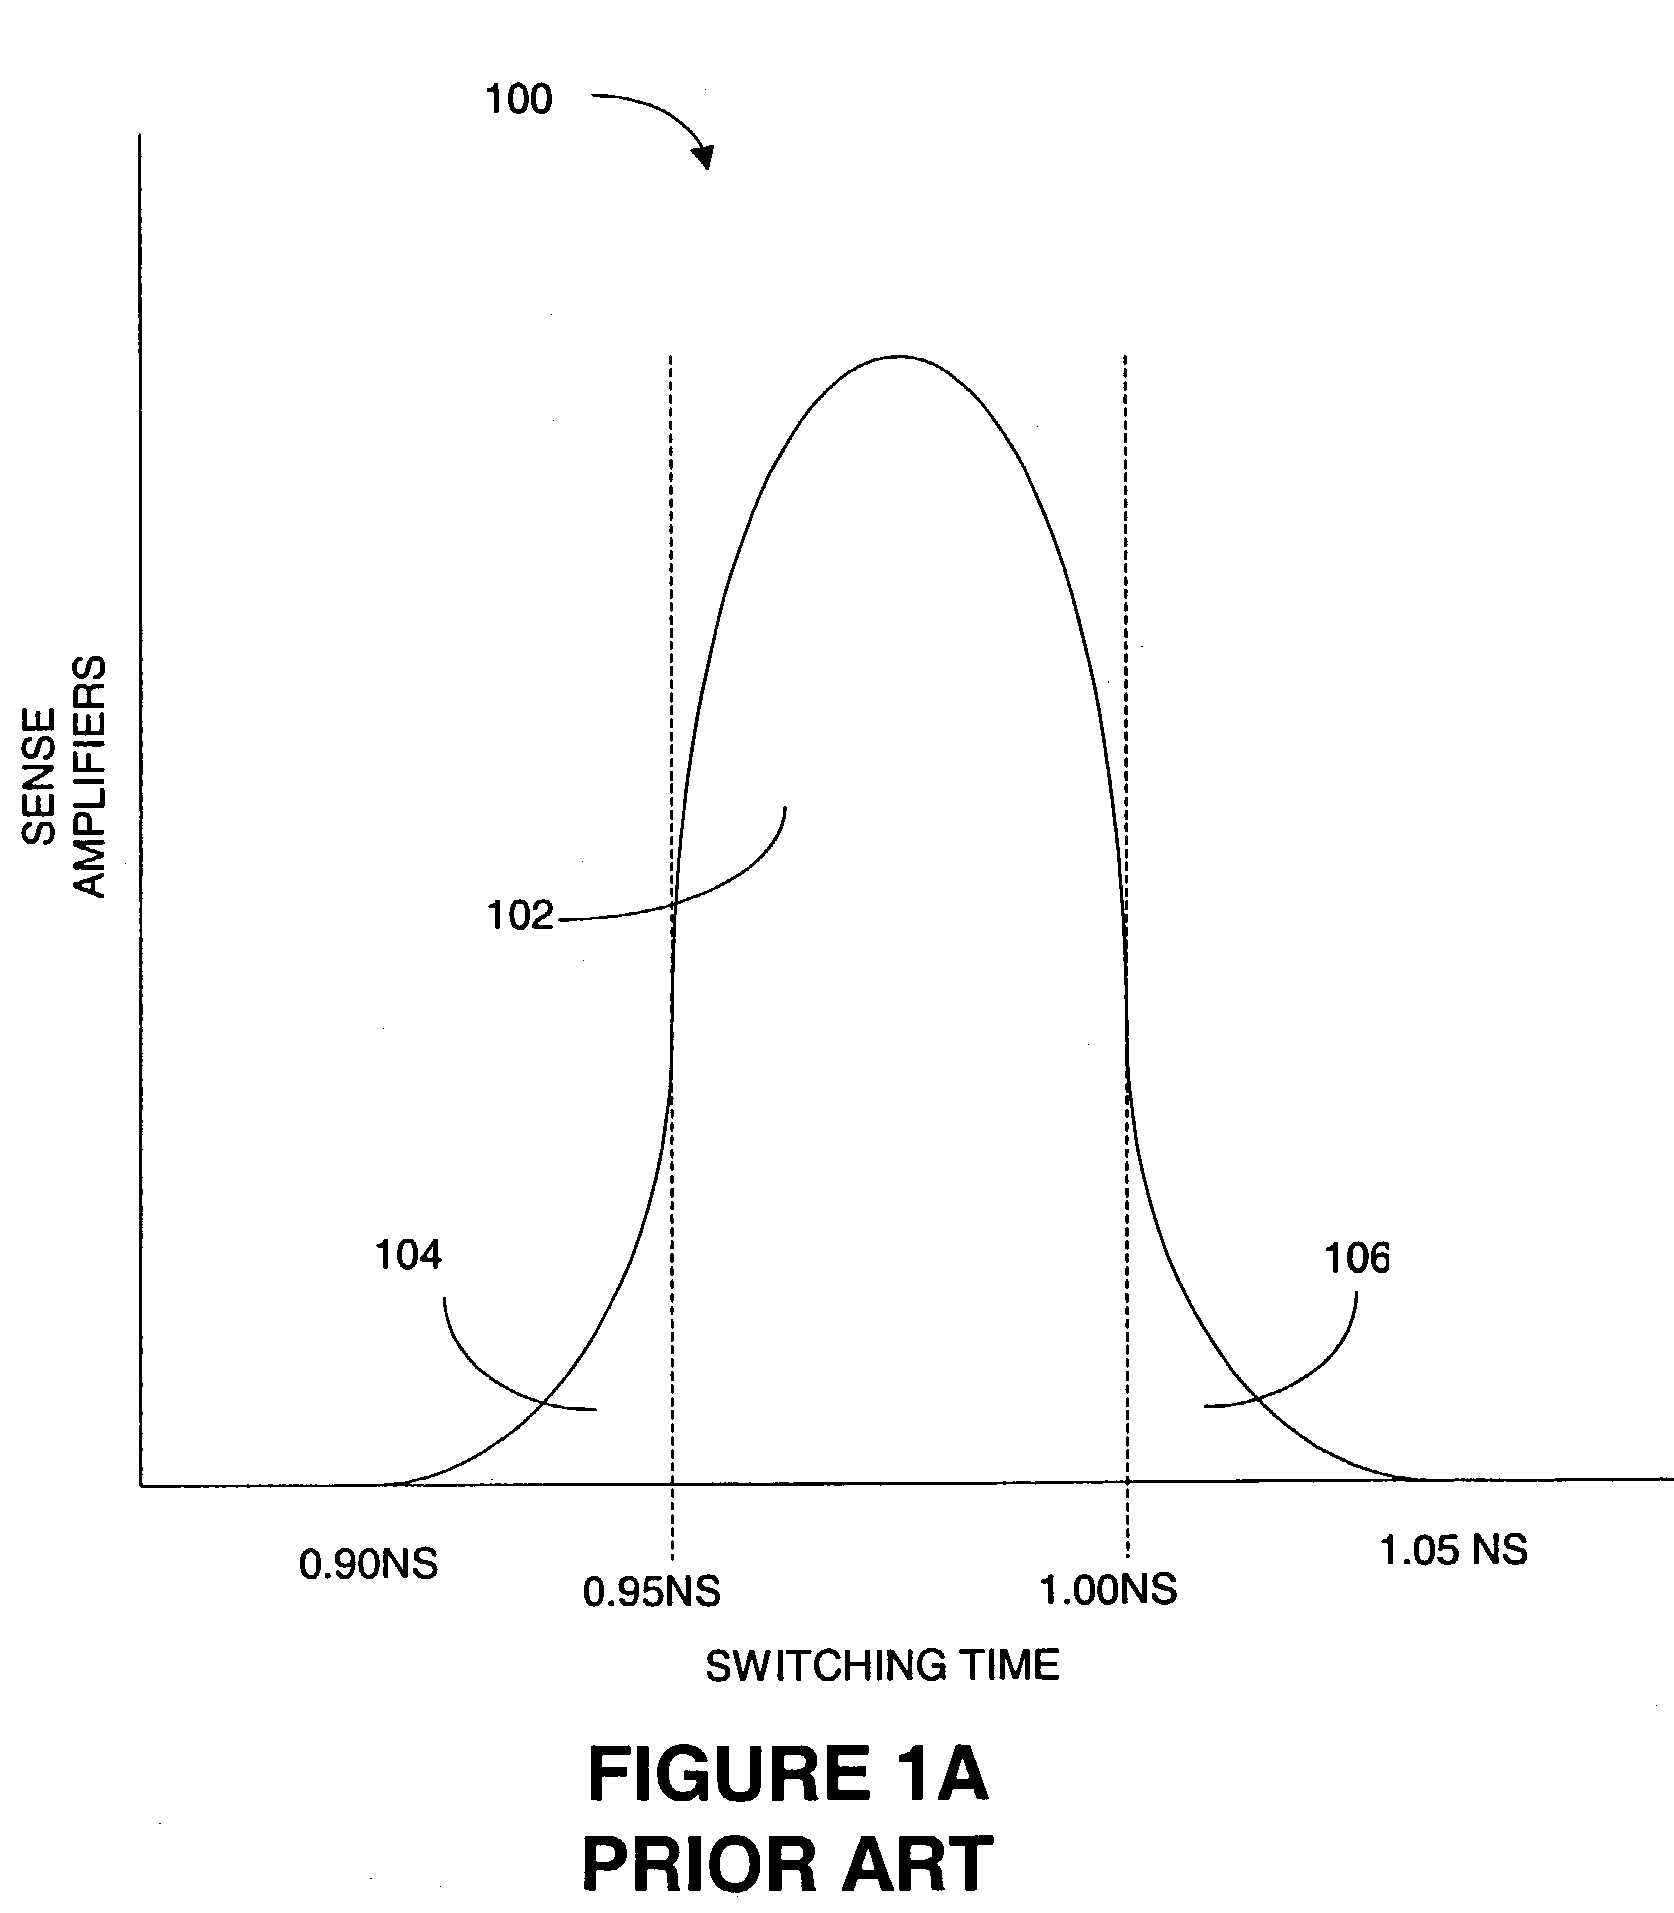 System, method and apparatus for improving sense amplifier performance characteristics using process feedback